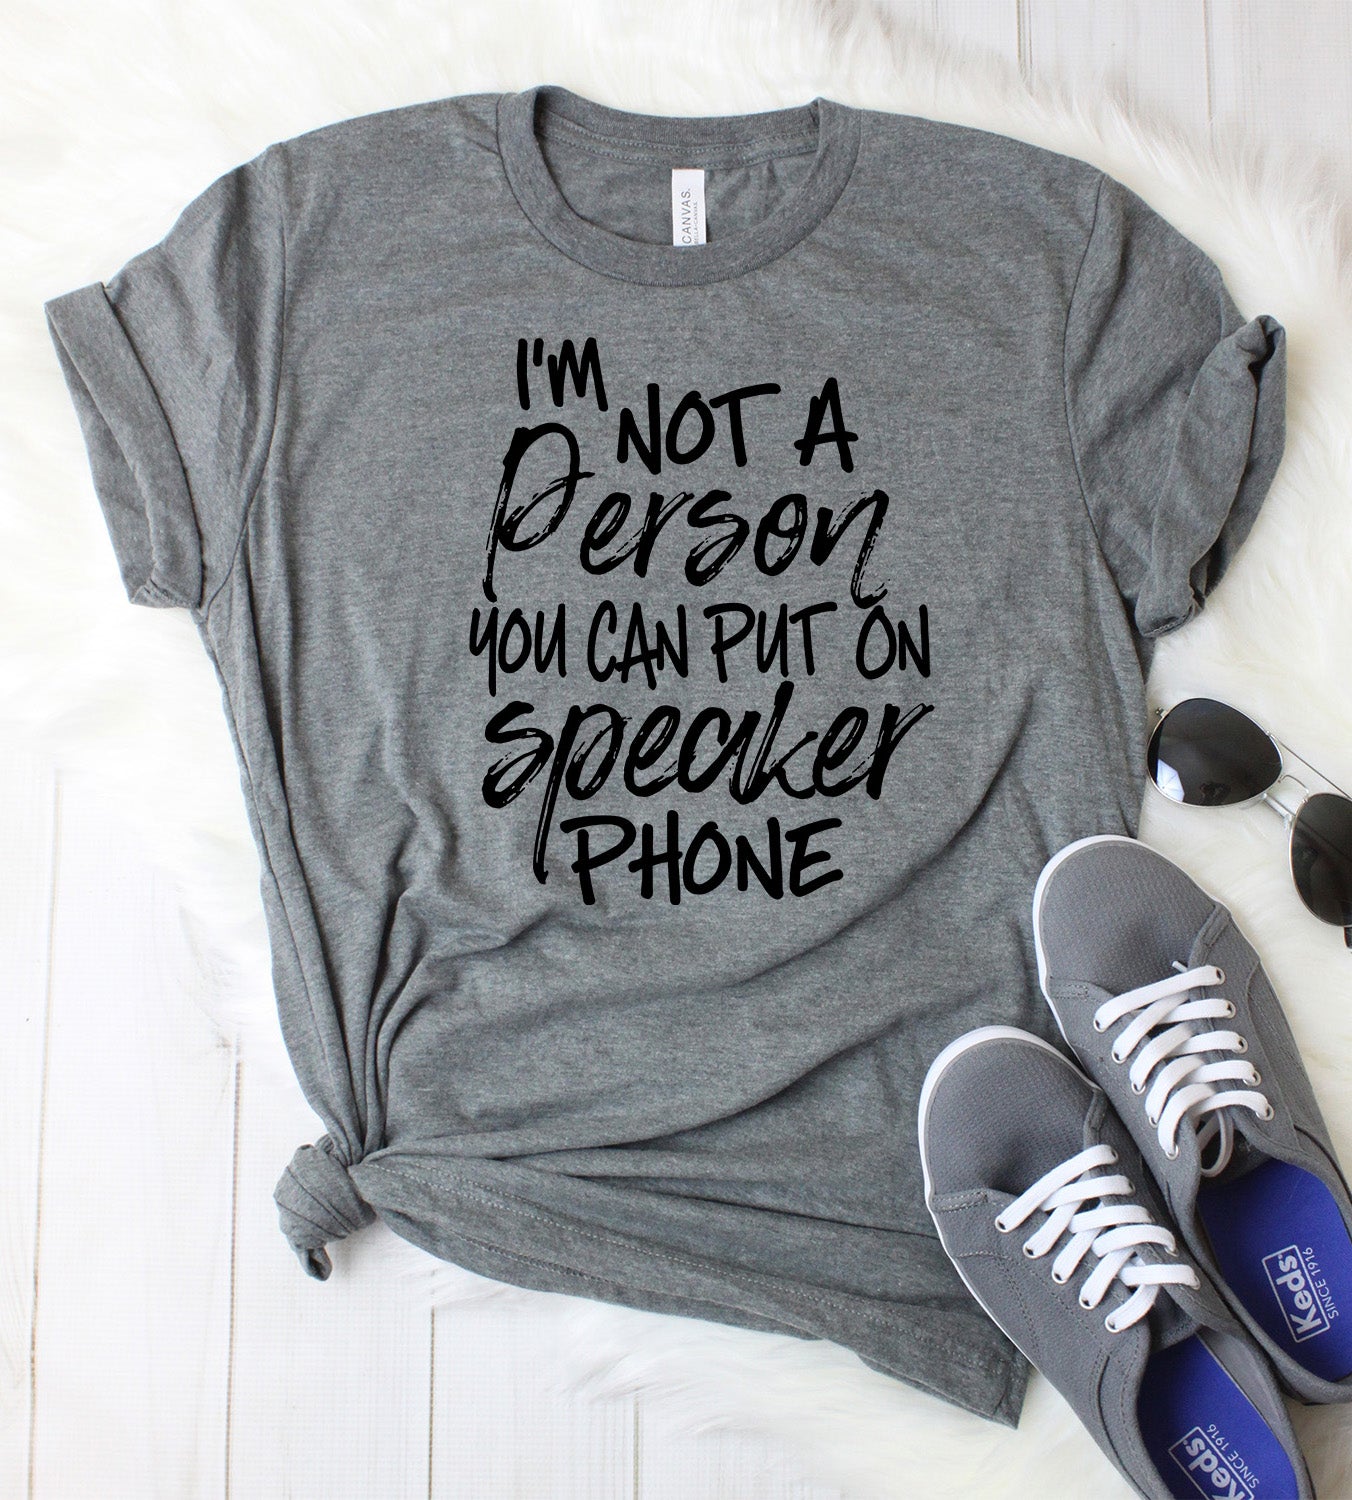 i'm not a person you can put on speaker phone t-shirt